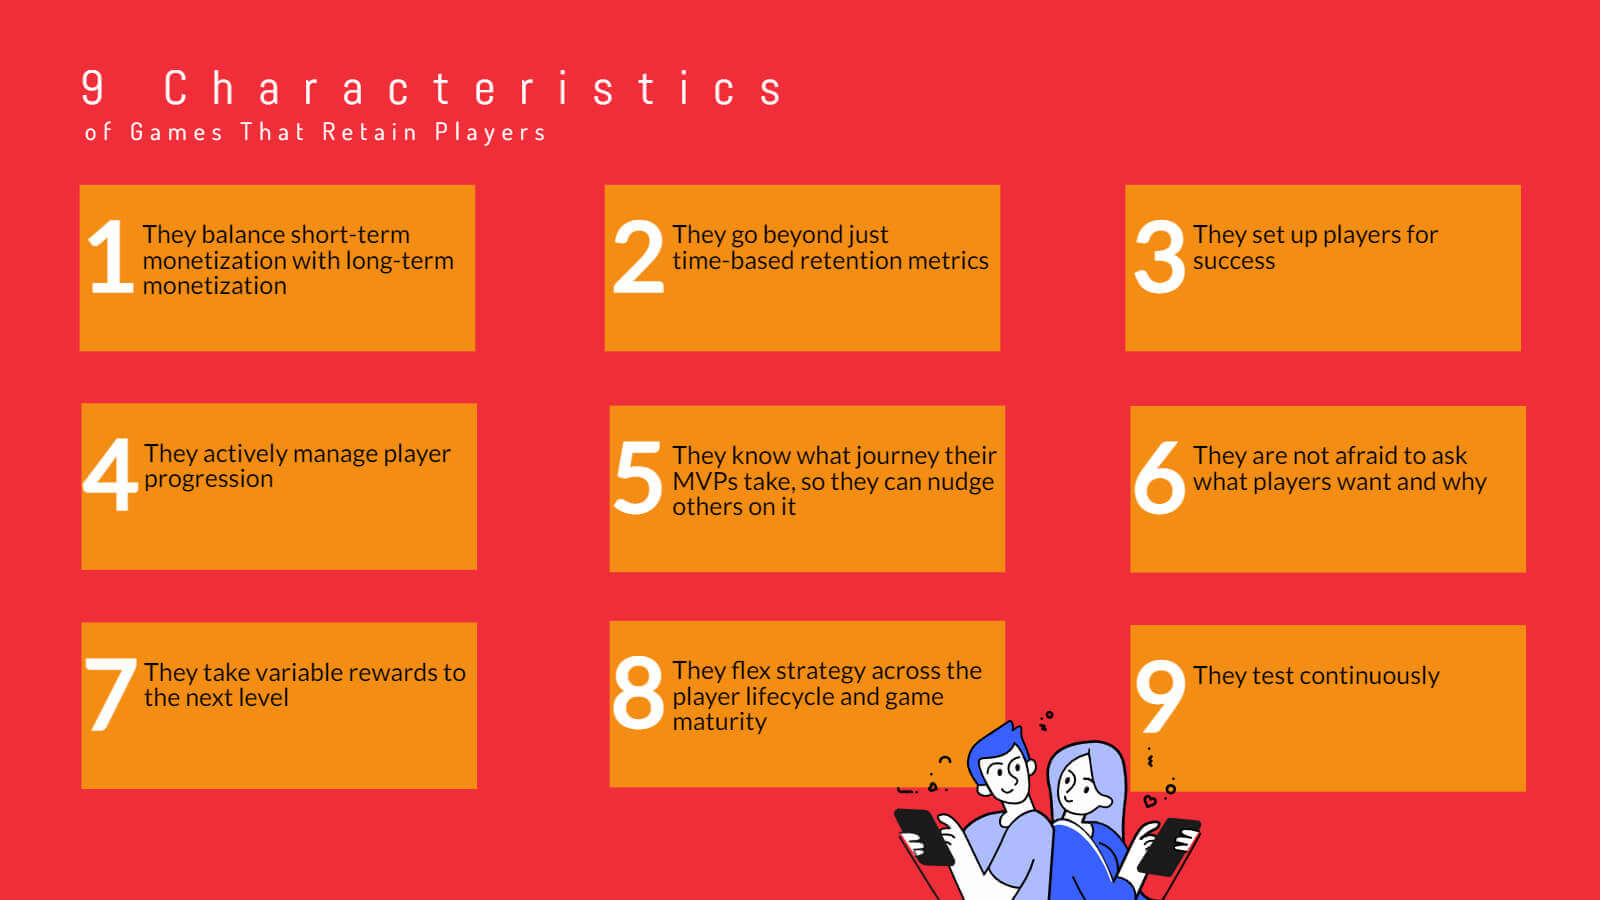 The Nine Characteristics of Games That Retain - infographic listing the 9 characteristics of games that retain players